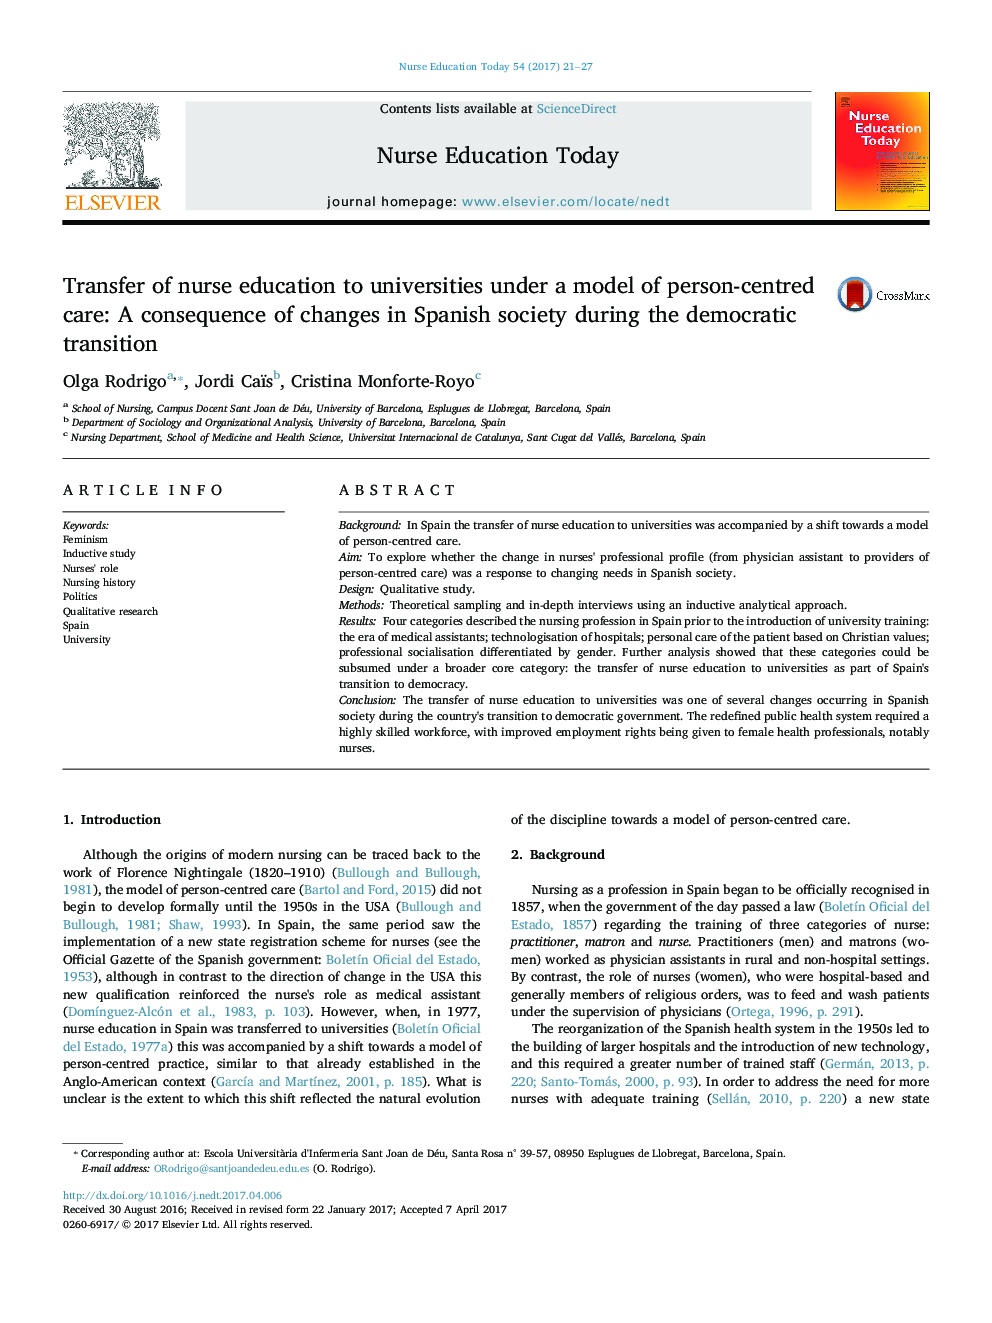 Transfer of nurse education to universities under a model of person-centred care: A consequence of changes in Spanish society during the democratic transition